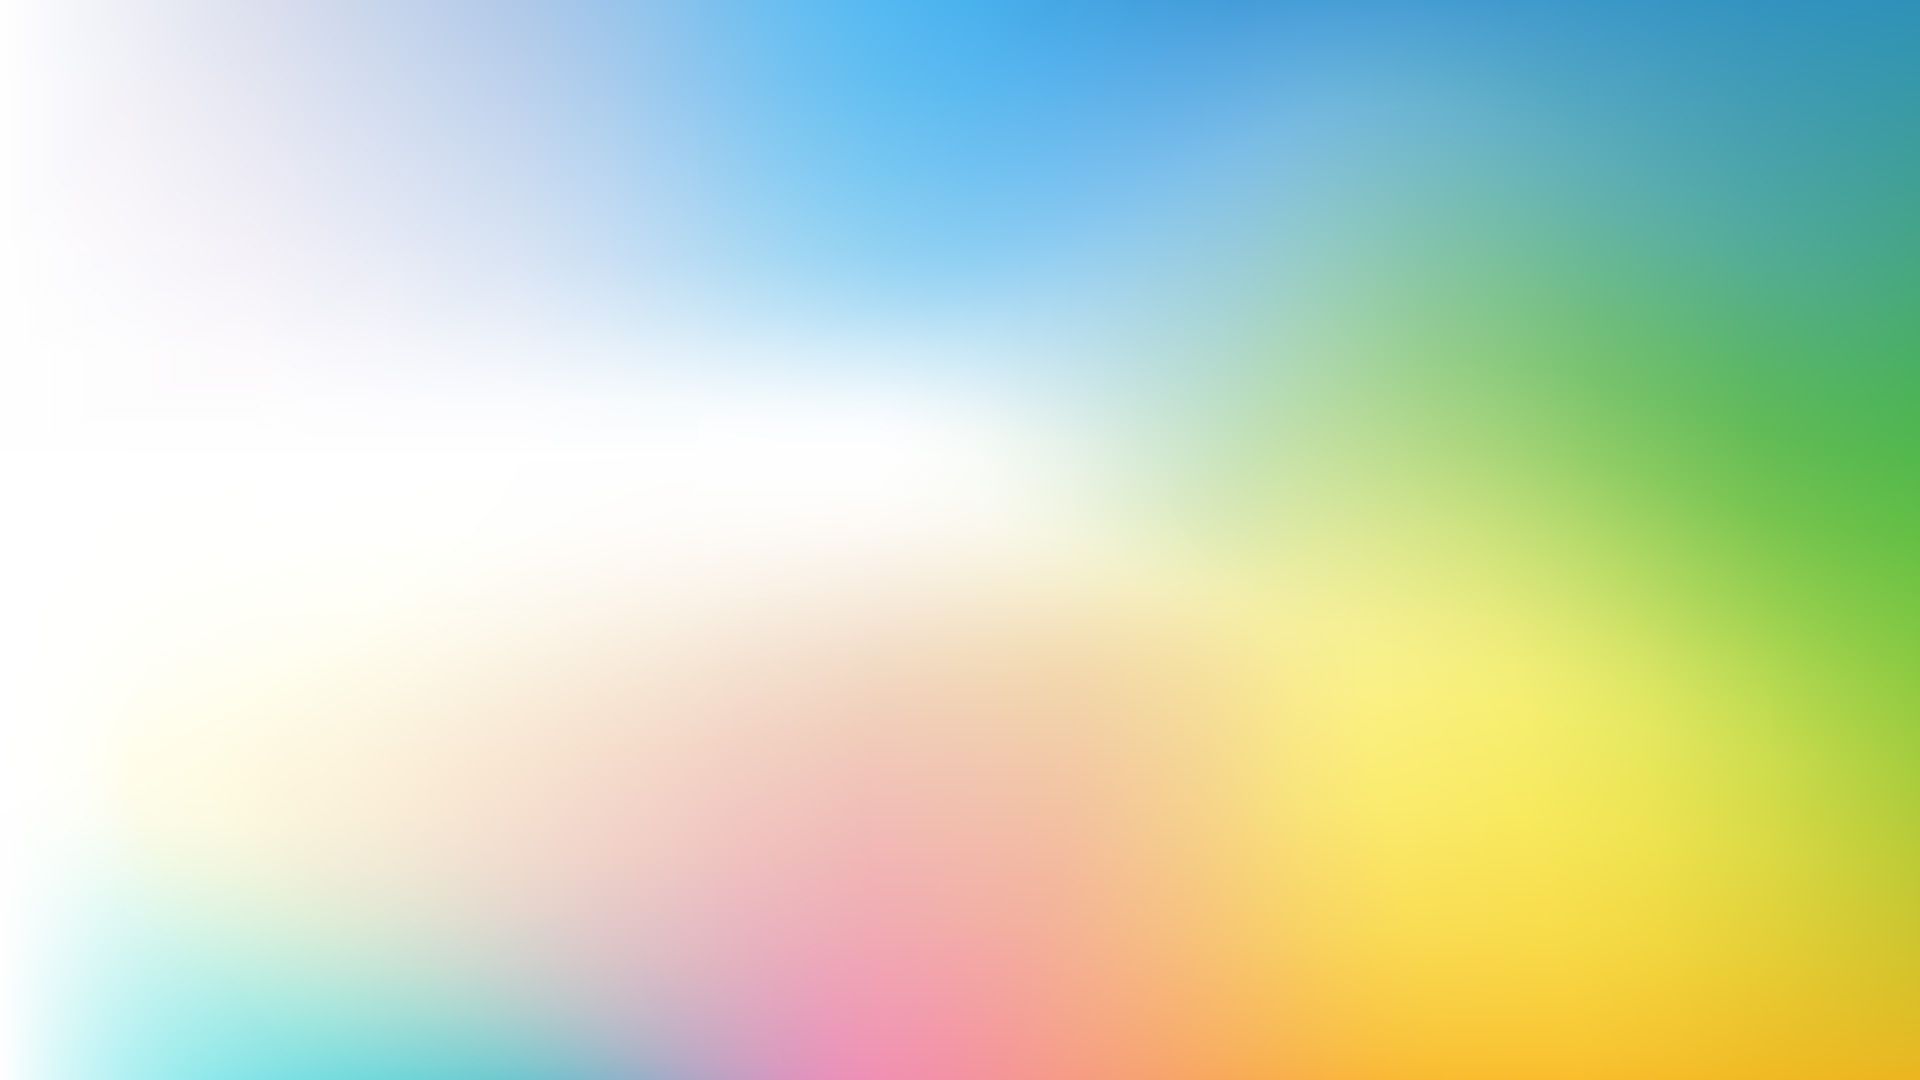 Gradient Colorful Powerpoint Templates - Abstract, Blue, Green, Orange,  Yellow - Free PPT Backgrounds and Templates